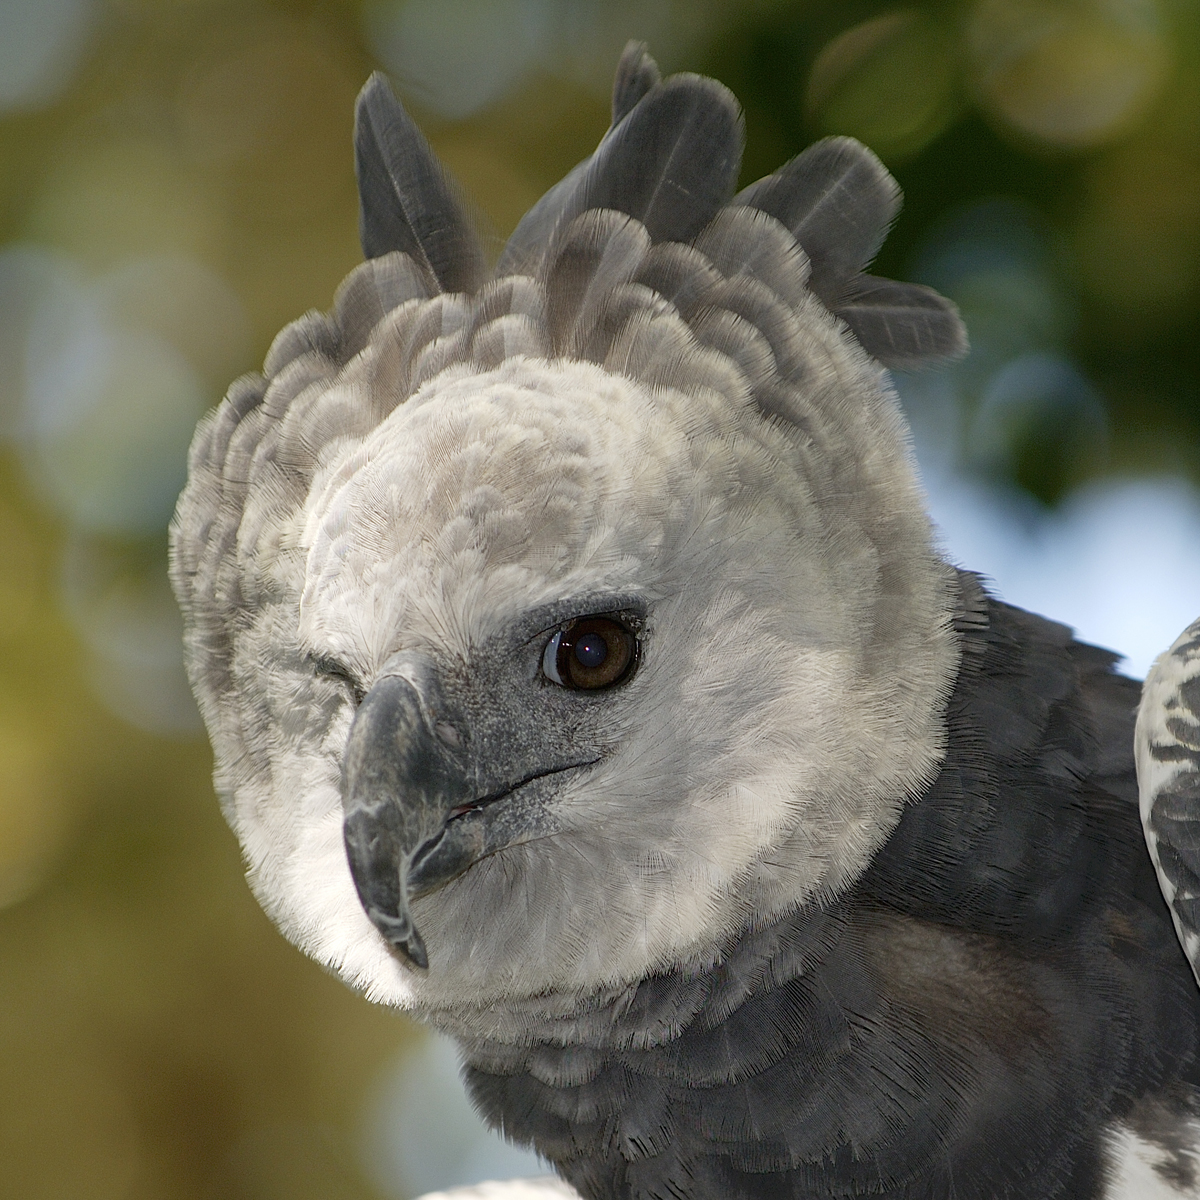 Harpy eagles could be under greater threat than previously thought